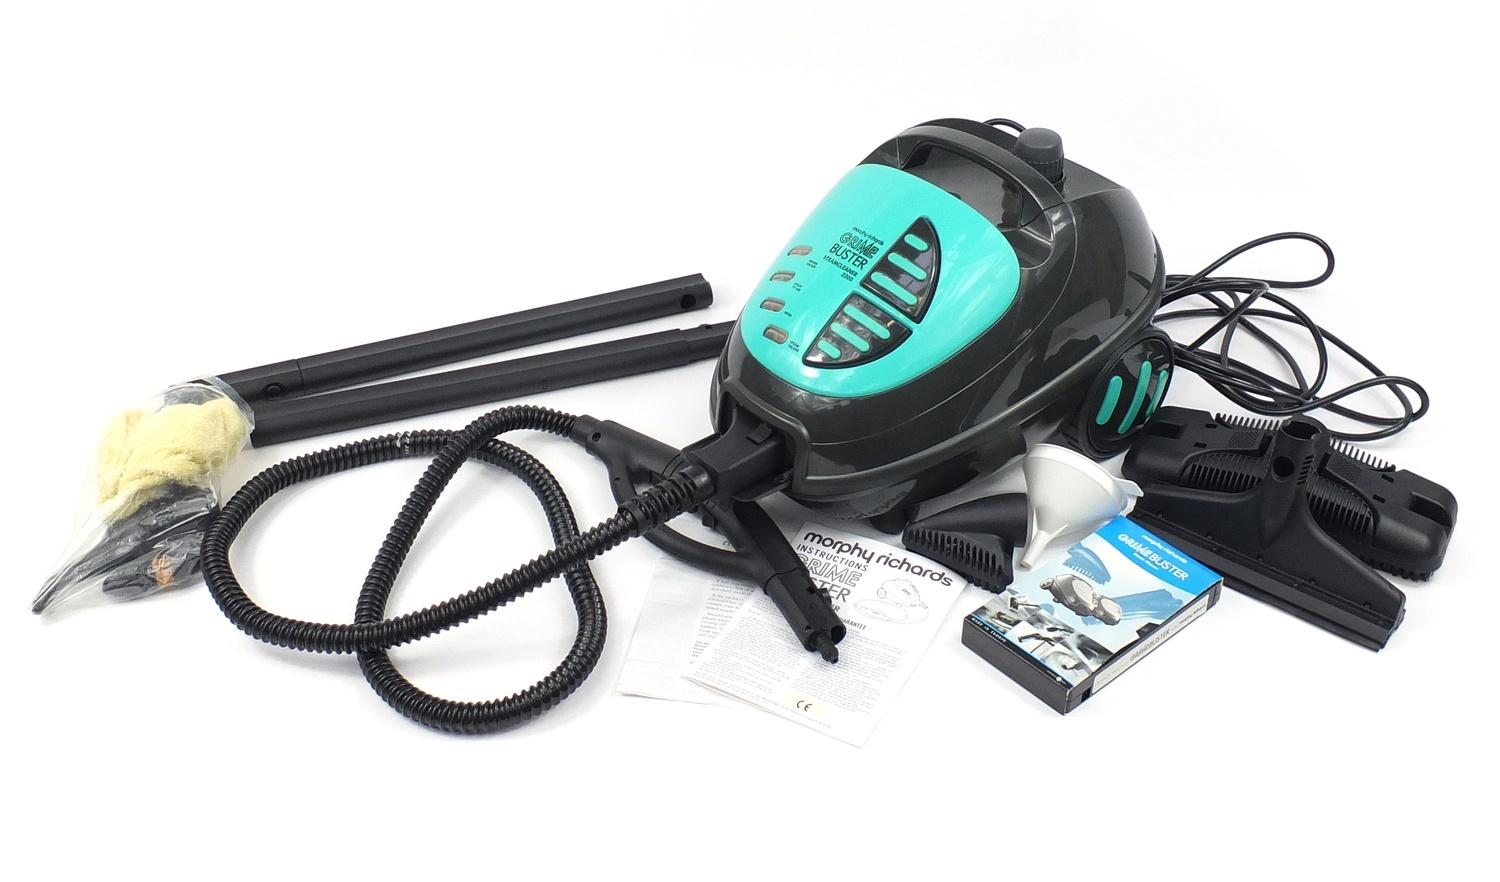 Morphy Richards Grime Buster Steam Cleaner 2200 :For Further Condition Reports Please Visit Our